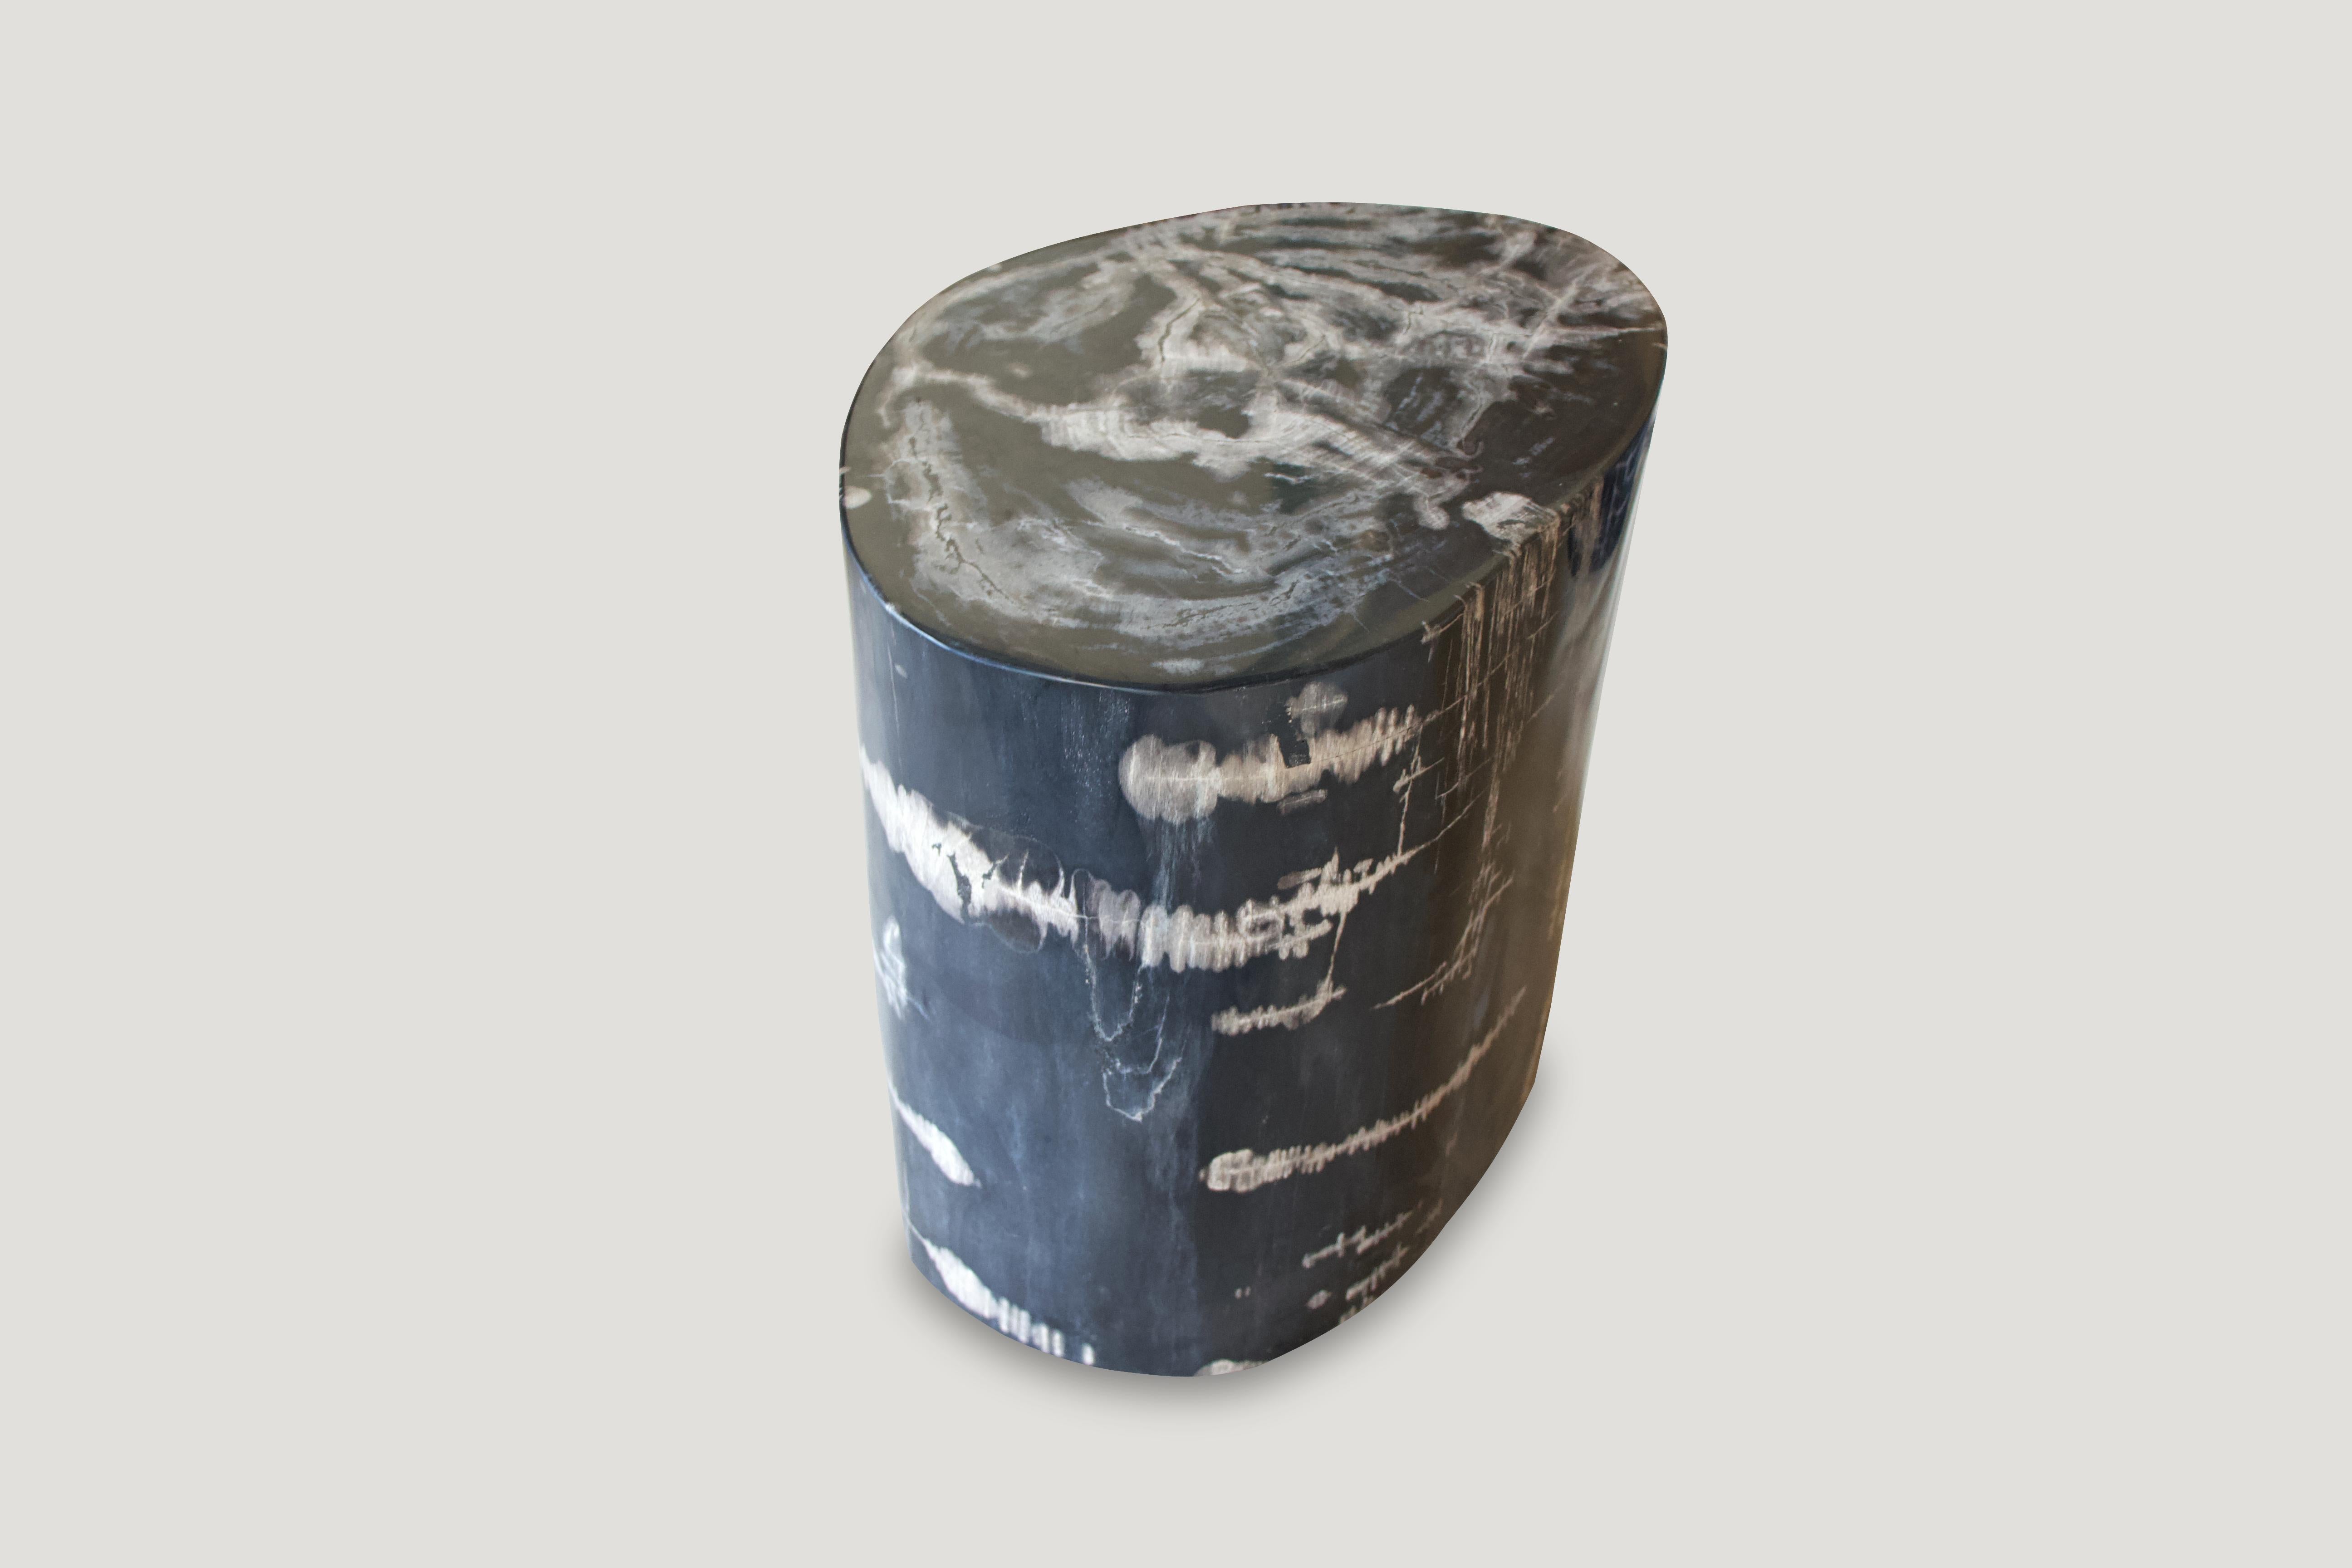 Stunning, black and white, high quality petrified wood side table. It’s fascinating how mother nature produces these stunning 40 million year old petrified teak logs with such contrasting colors with natural patterns throughout. Modern yet with so